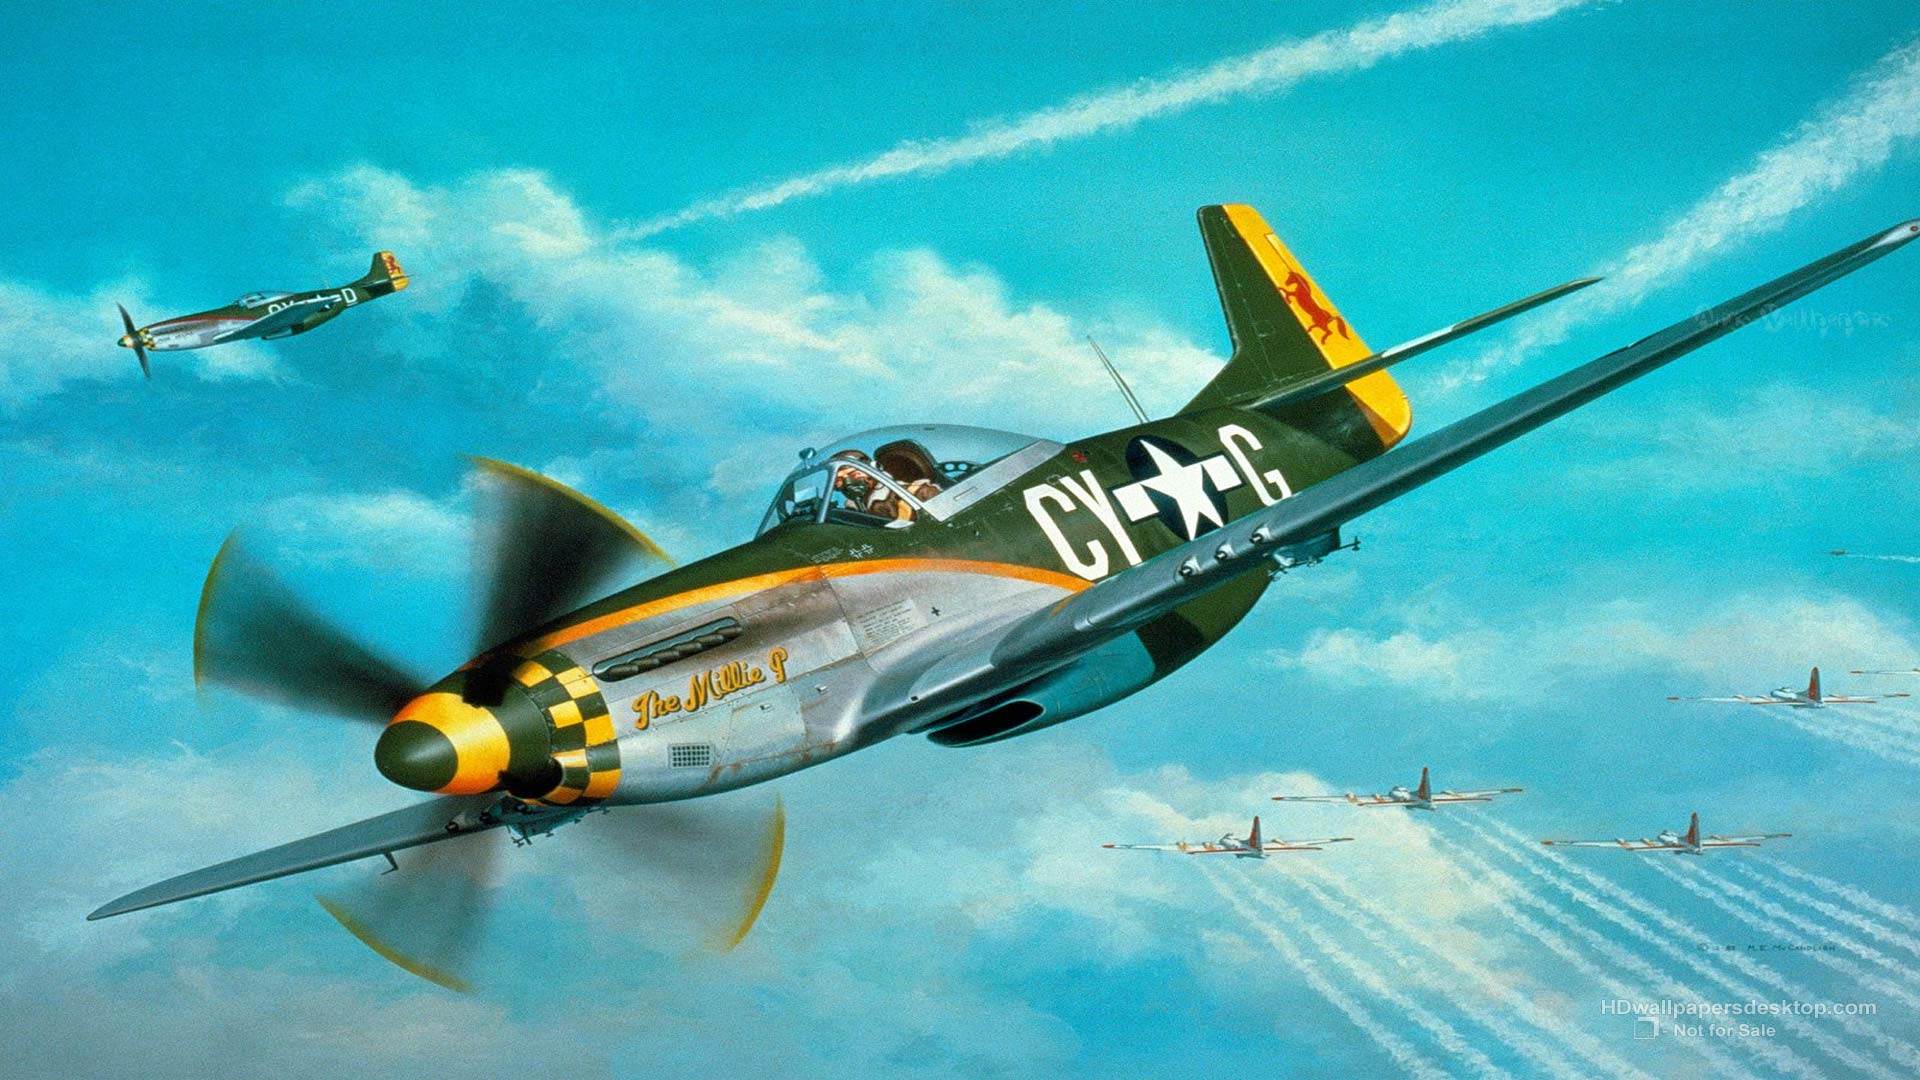 HD ww2 aircraft wallpapers  Peakpx